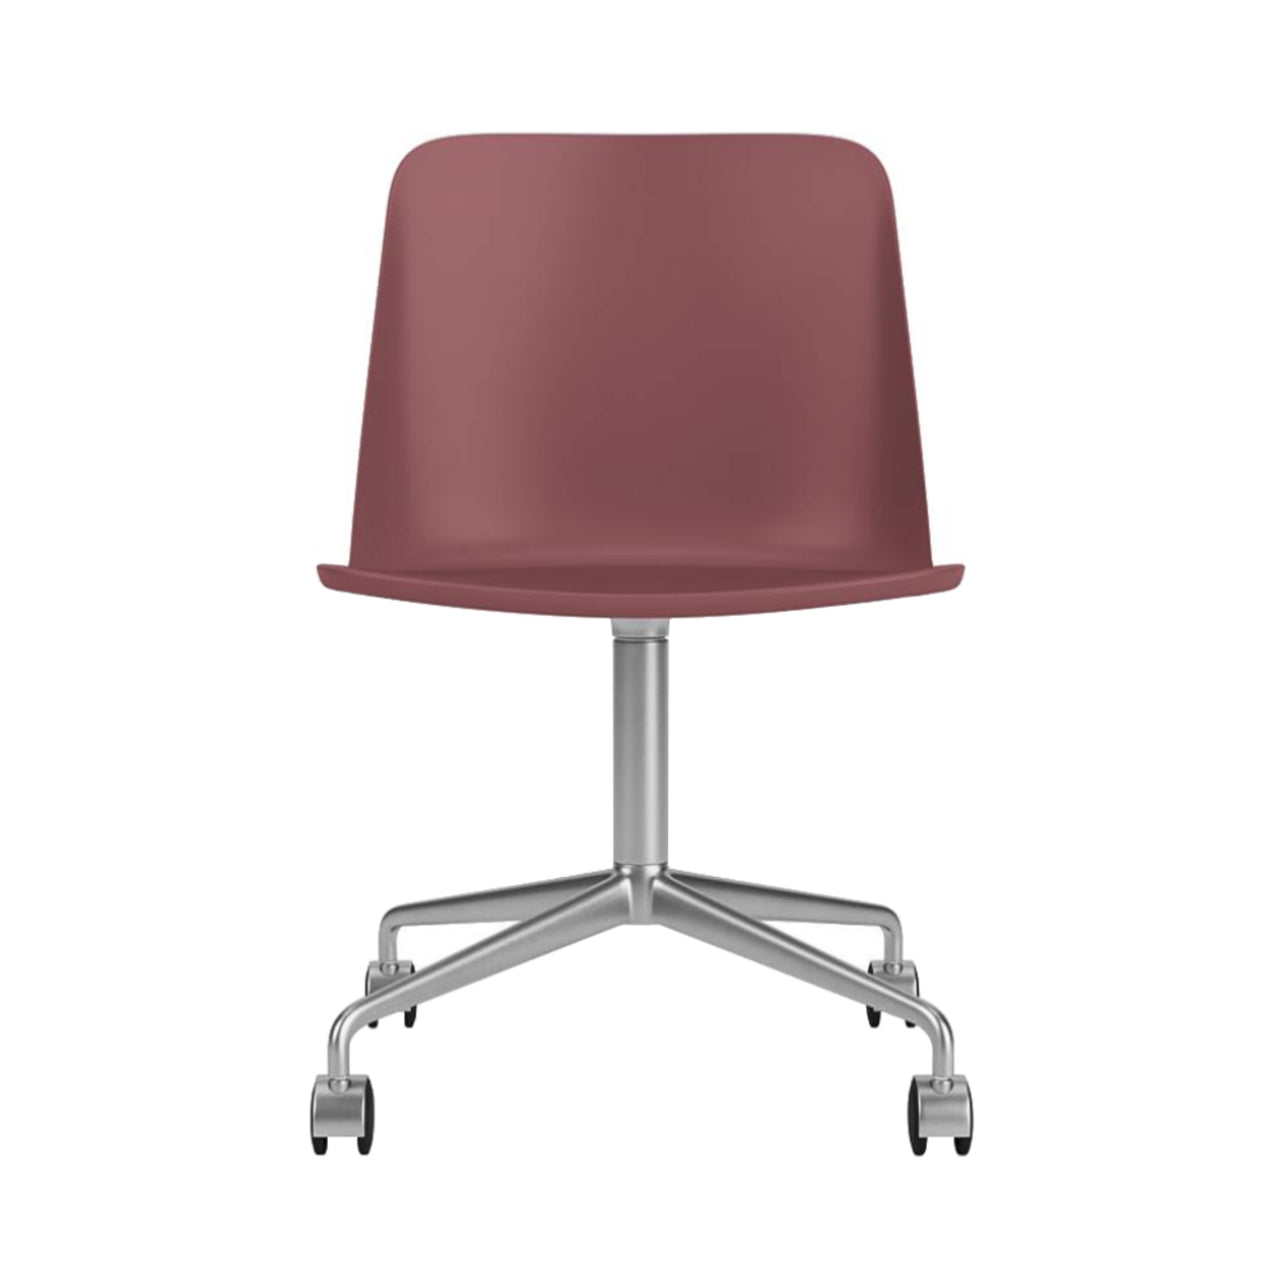 Rely Chair HW21: Red Brown + Polished Aluminum